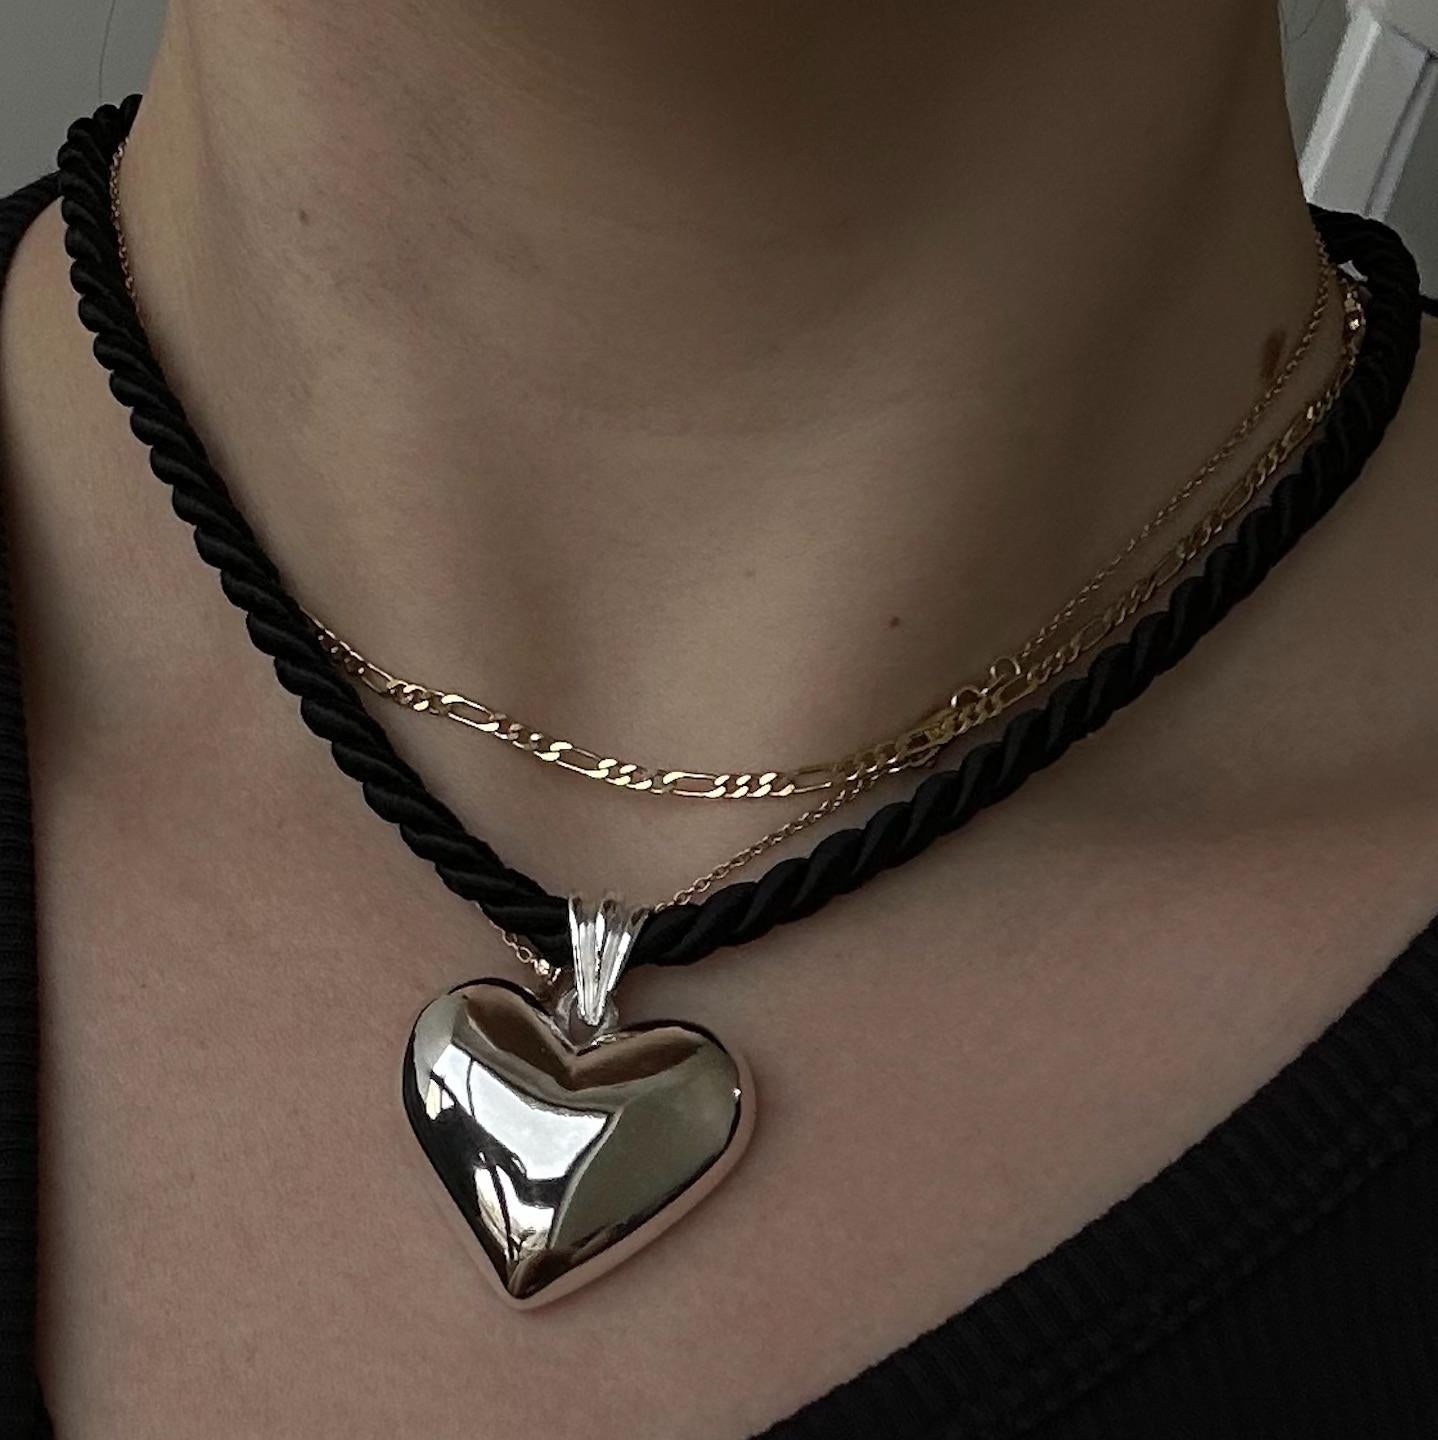 The Heavy Heart Pendant is crafted from 14k yellow gold and hung on a twisted cotton cord. A piece that feels trend-forward, but is made to last forever. 

Lays flat on the neck
Adjustable between 16-18' inches
Lobster clasp closure 

Each Ruth Nyc